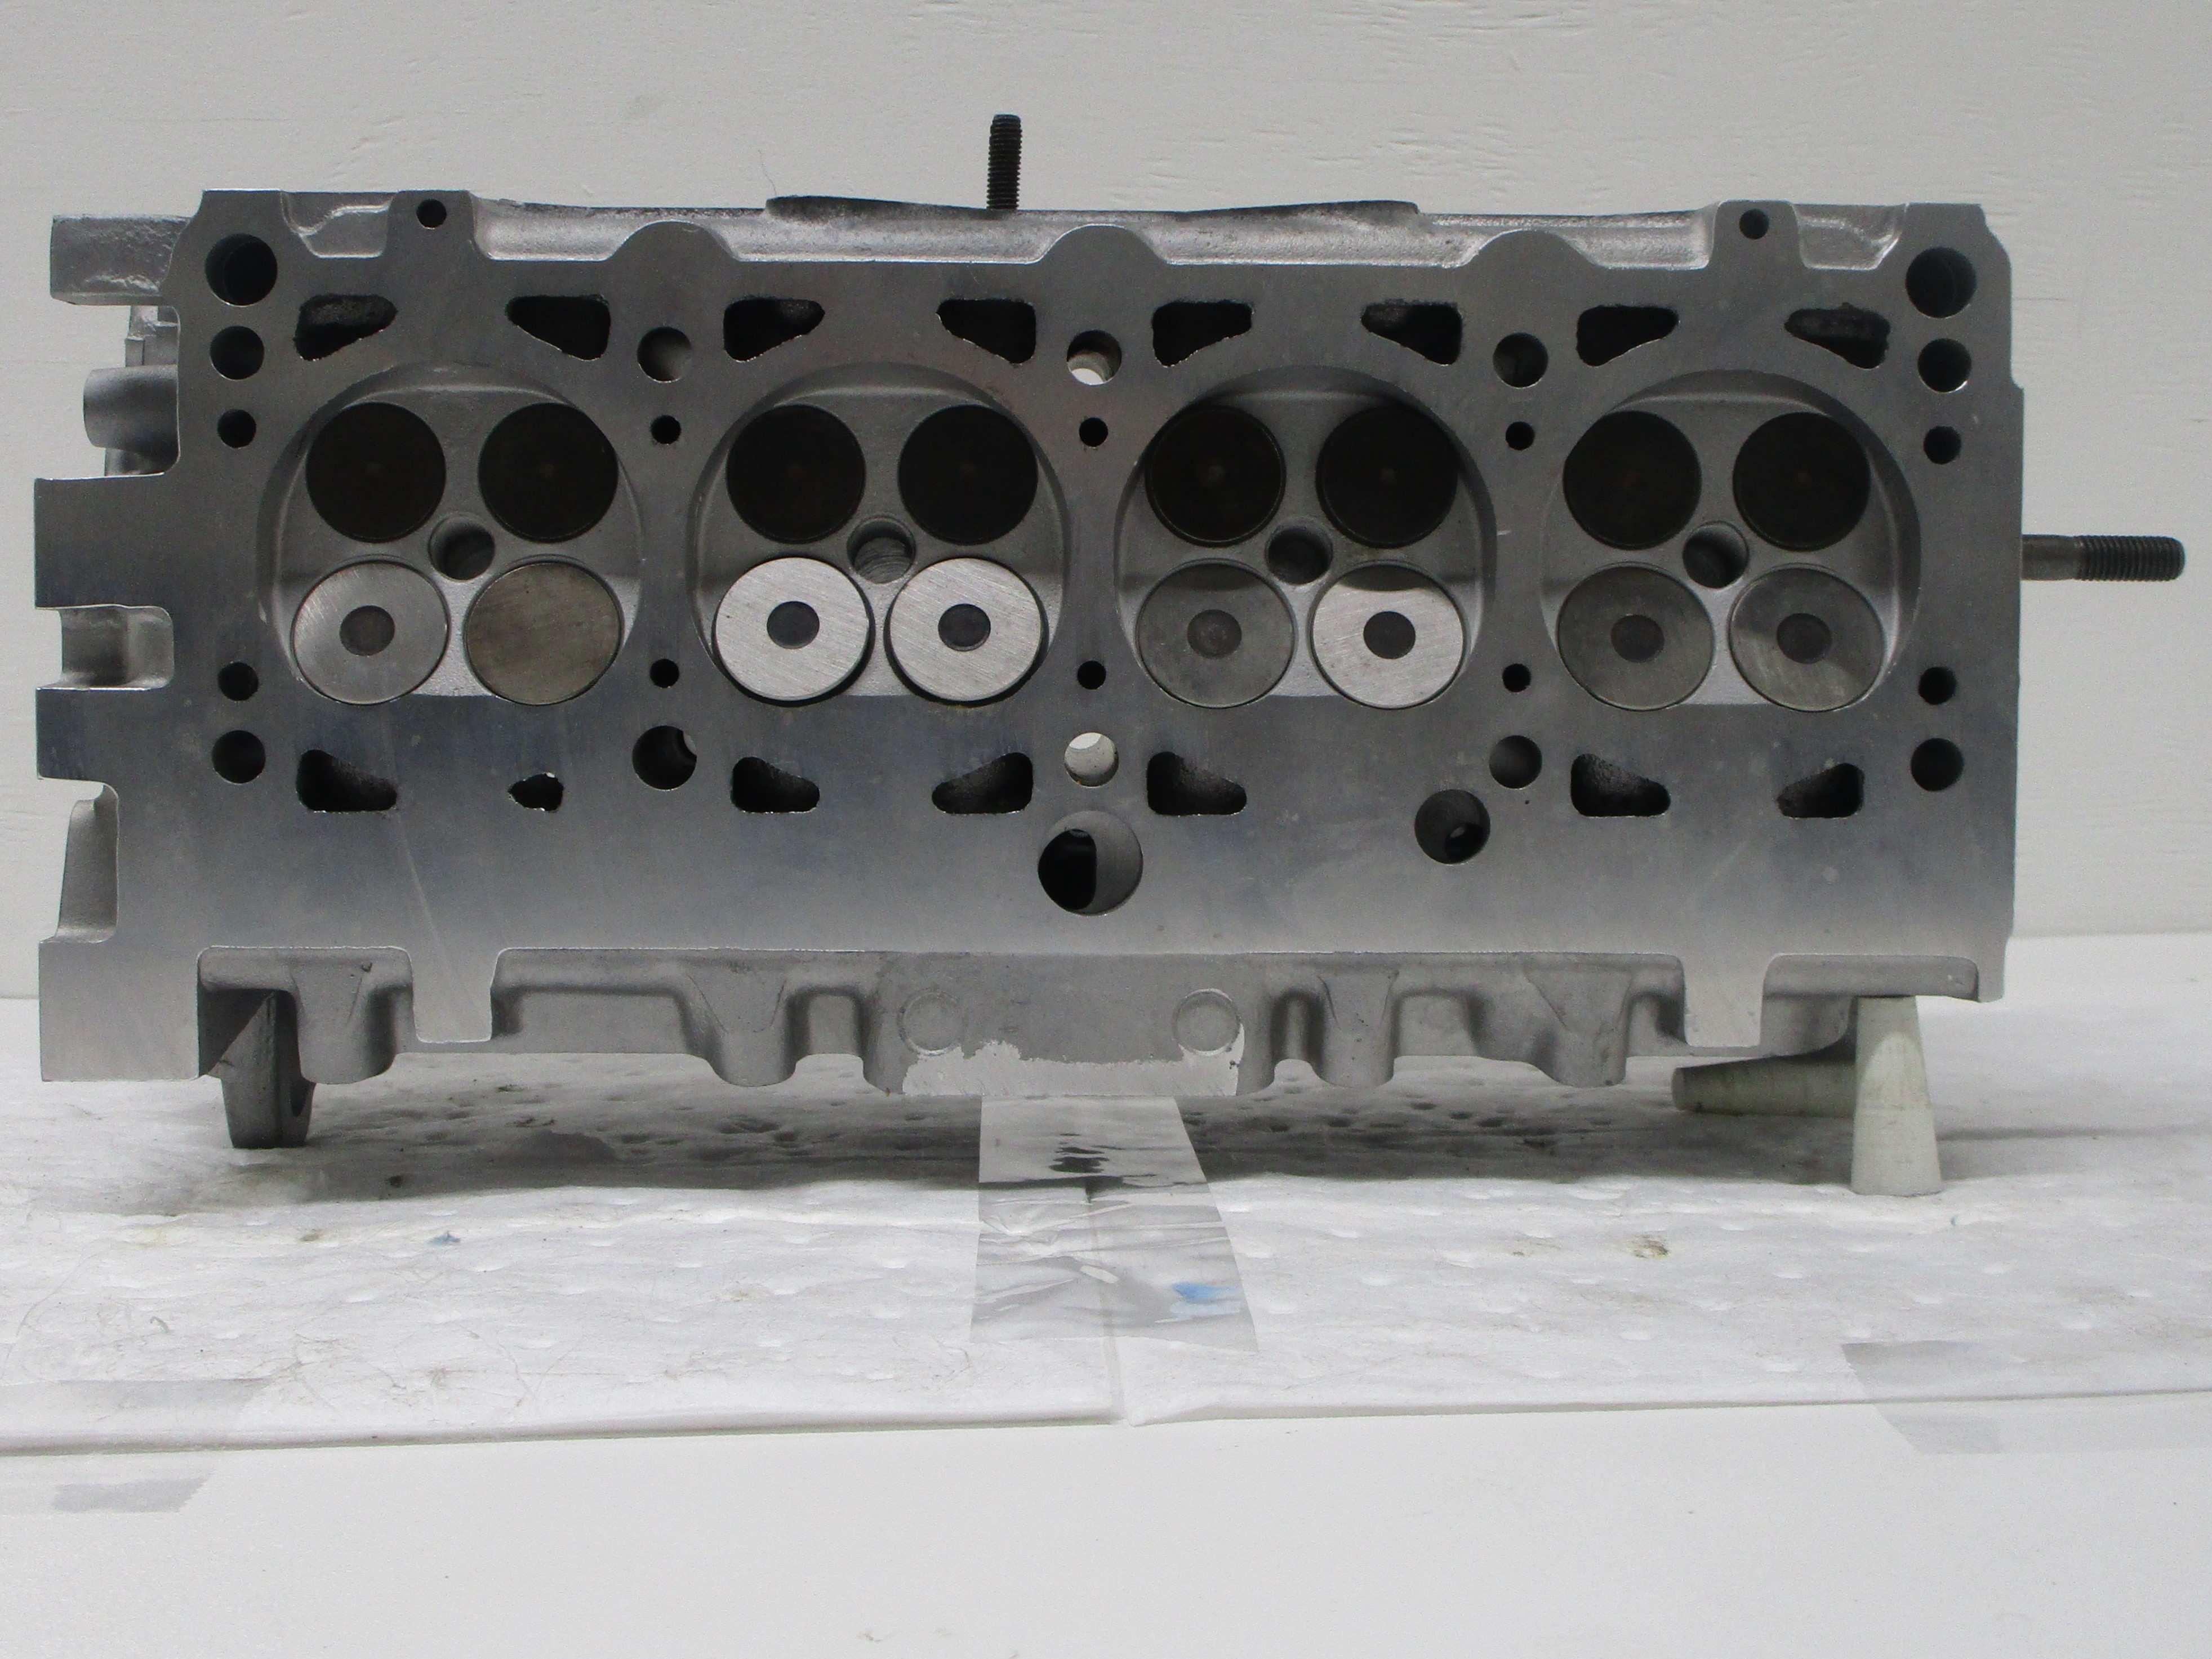 1986-93 Volkswagen: 1986-1989 Golf, 1.8L (KR/PL) 1990-1993 Jetta  2.0L Reconditioned Cylinder Head W/Cams - Casting #027103373E ($100 Core Charge)